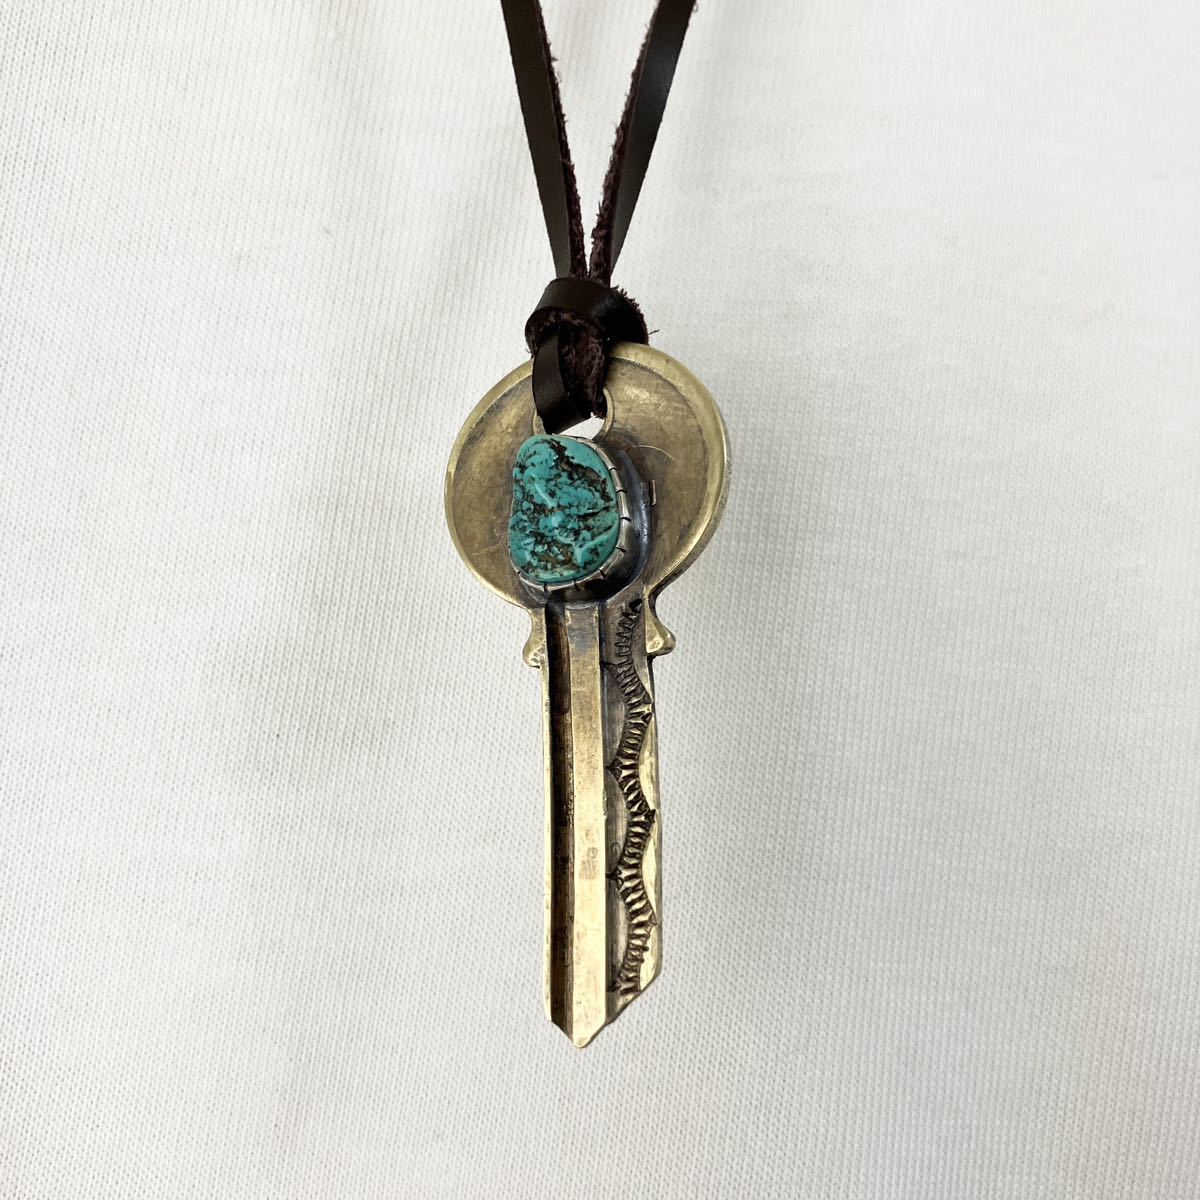  King man turquoise brass made Vintage key key necklace # Indian jewelry Native American n brass silver 